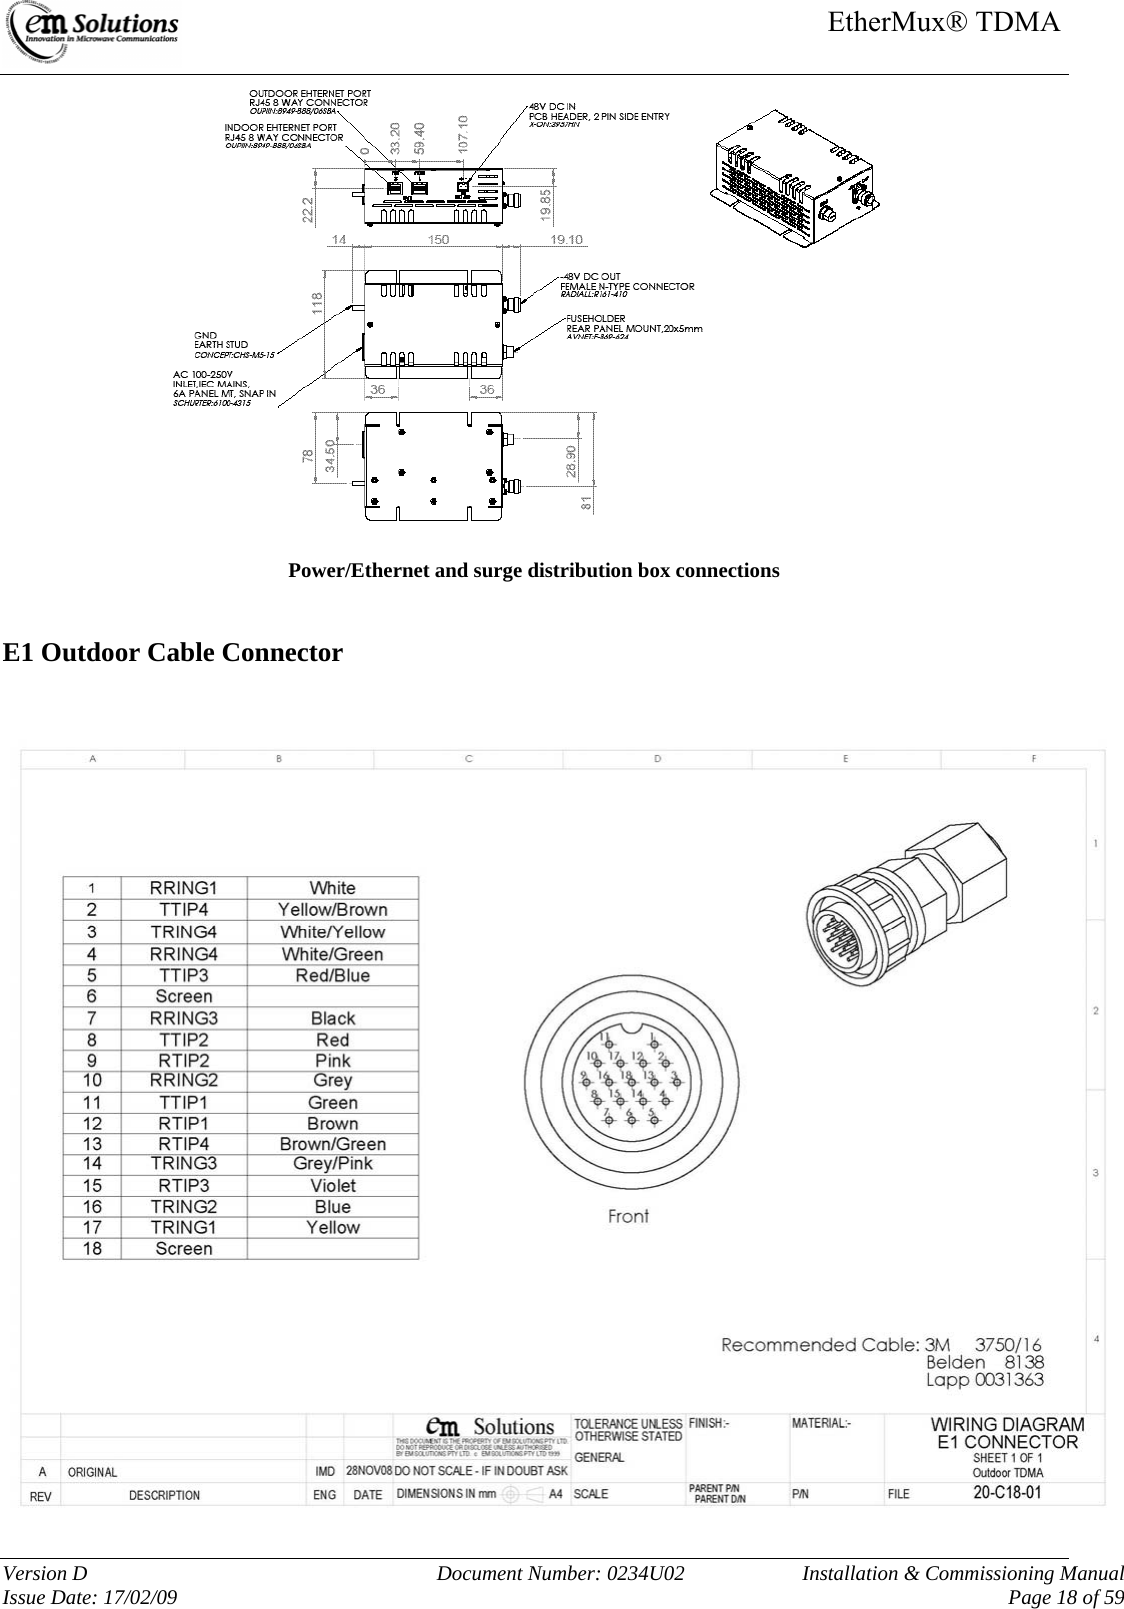     EtherMux® TDMA   Version D  Document Number: 0234U02   Installation &amp; Commissioning Manual Issue Date: 17/02/09     Page 18 of 59   Power/Ethernet and surge distribution box connections  E1 Outdoor Cable Connector    